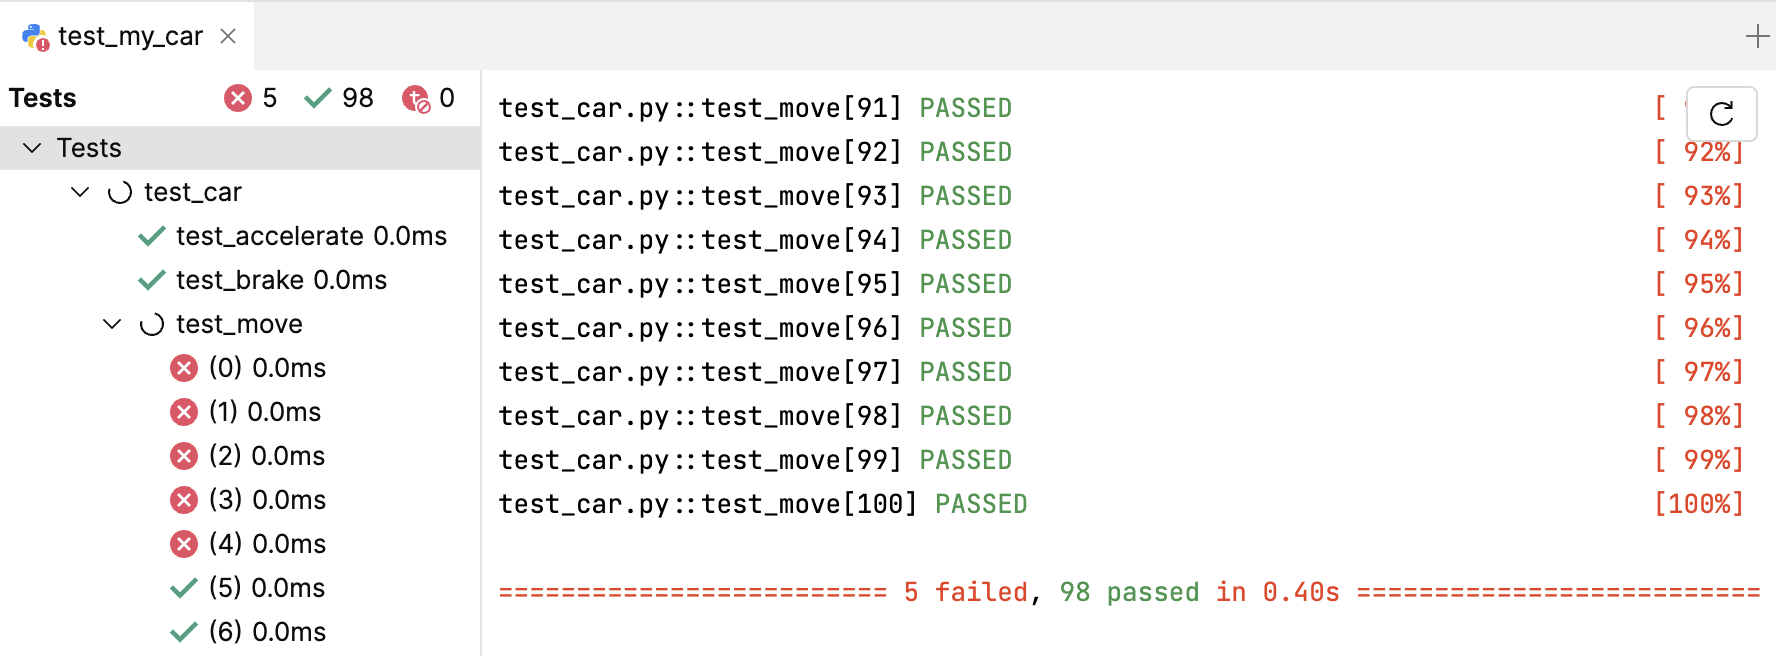 Results of parametrized tests